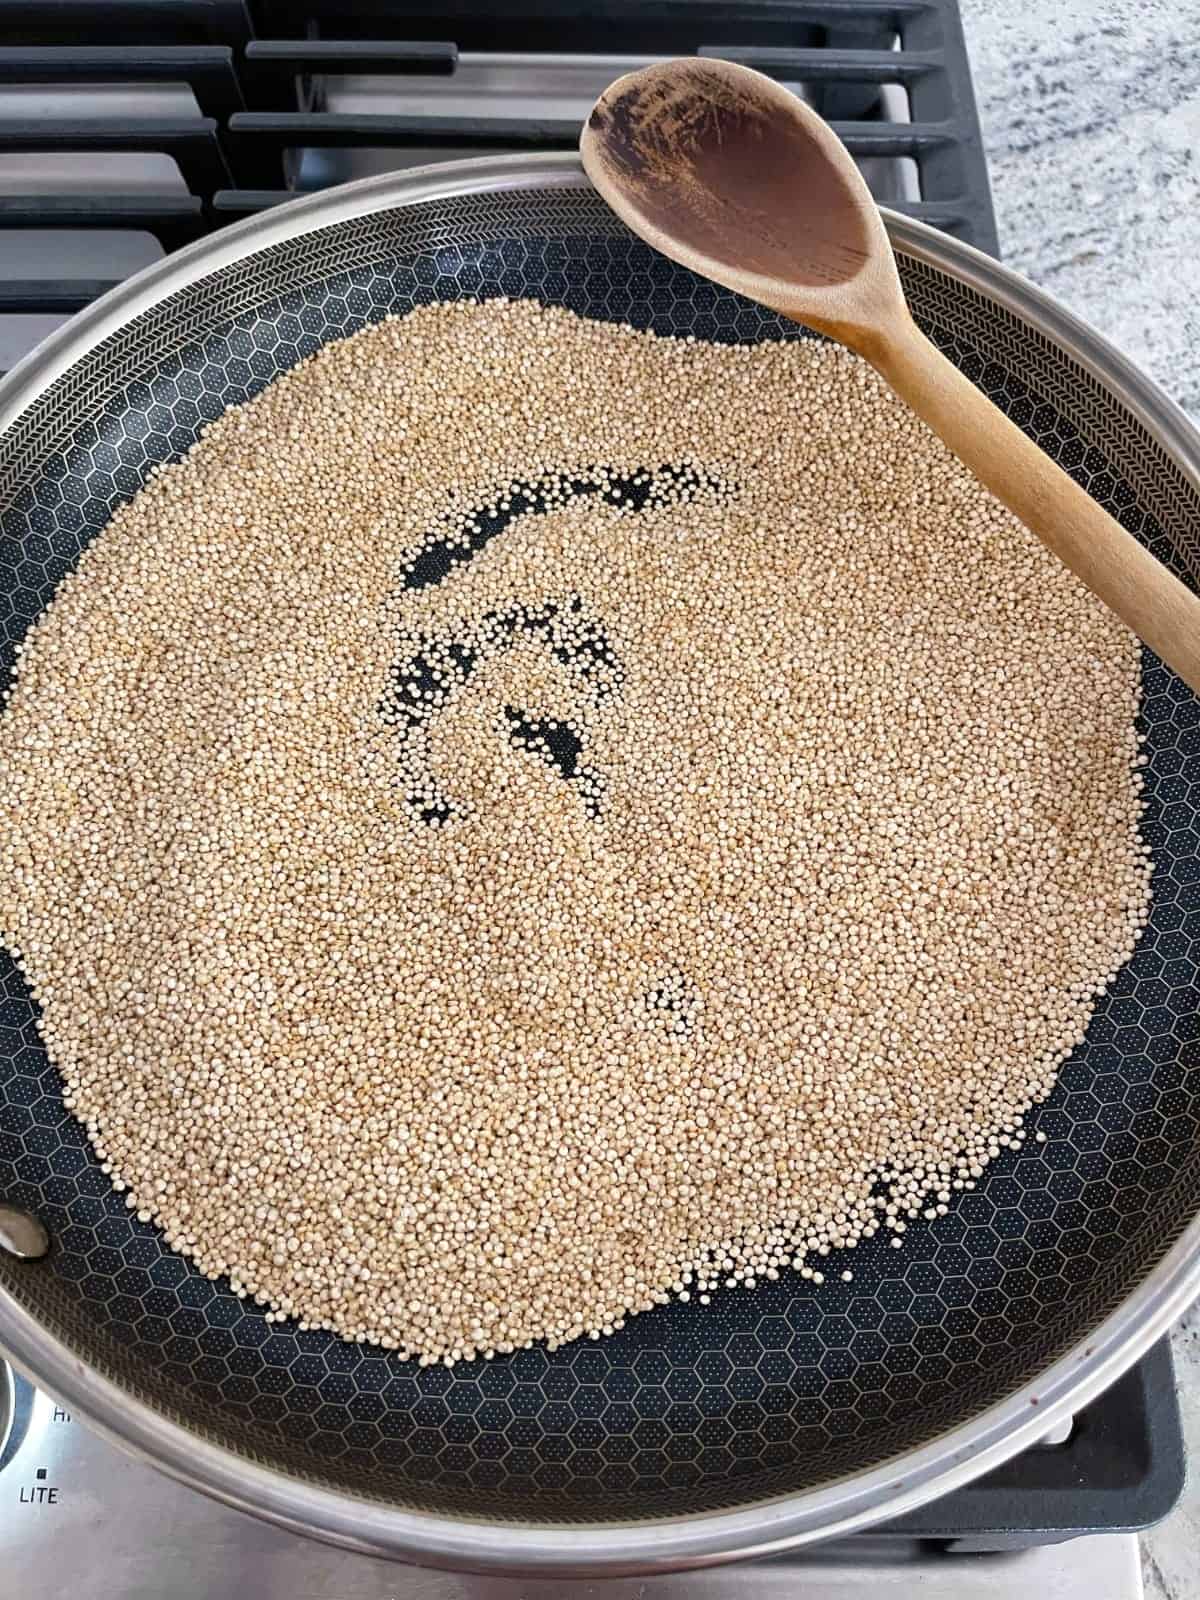 Toasting quinoa to golden brown in skillet on stovetop.